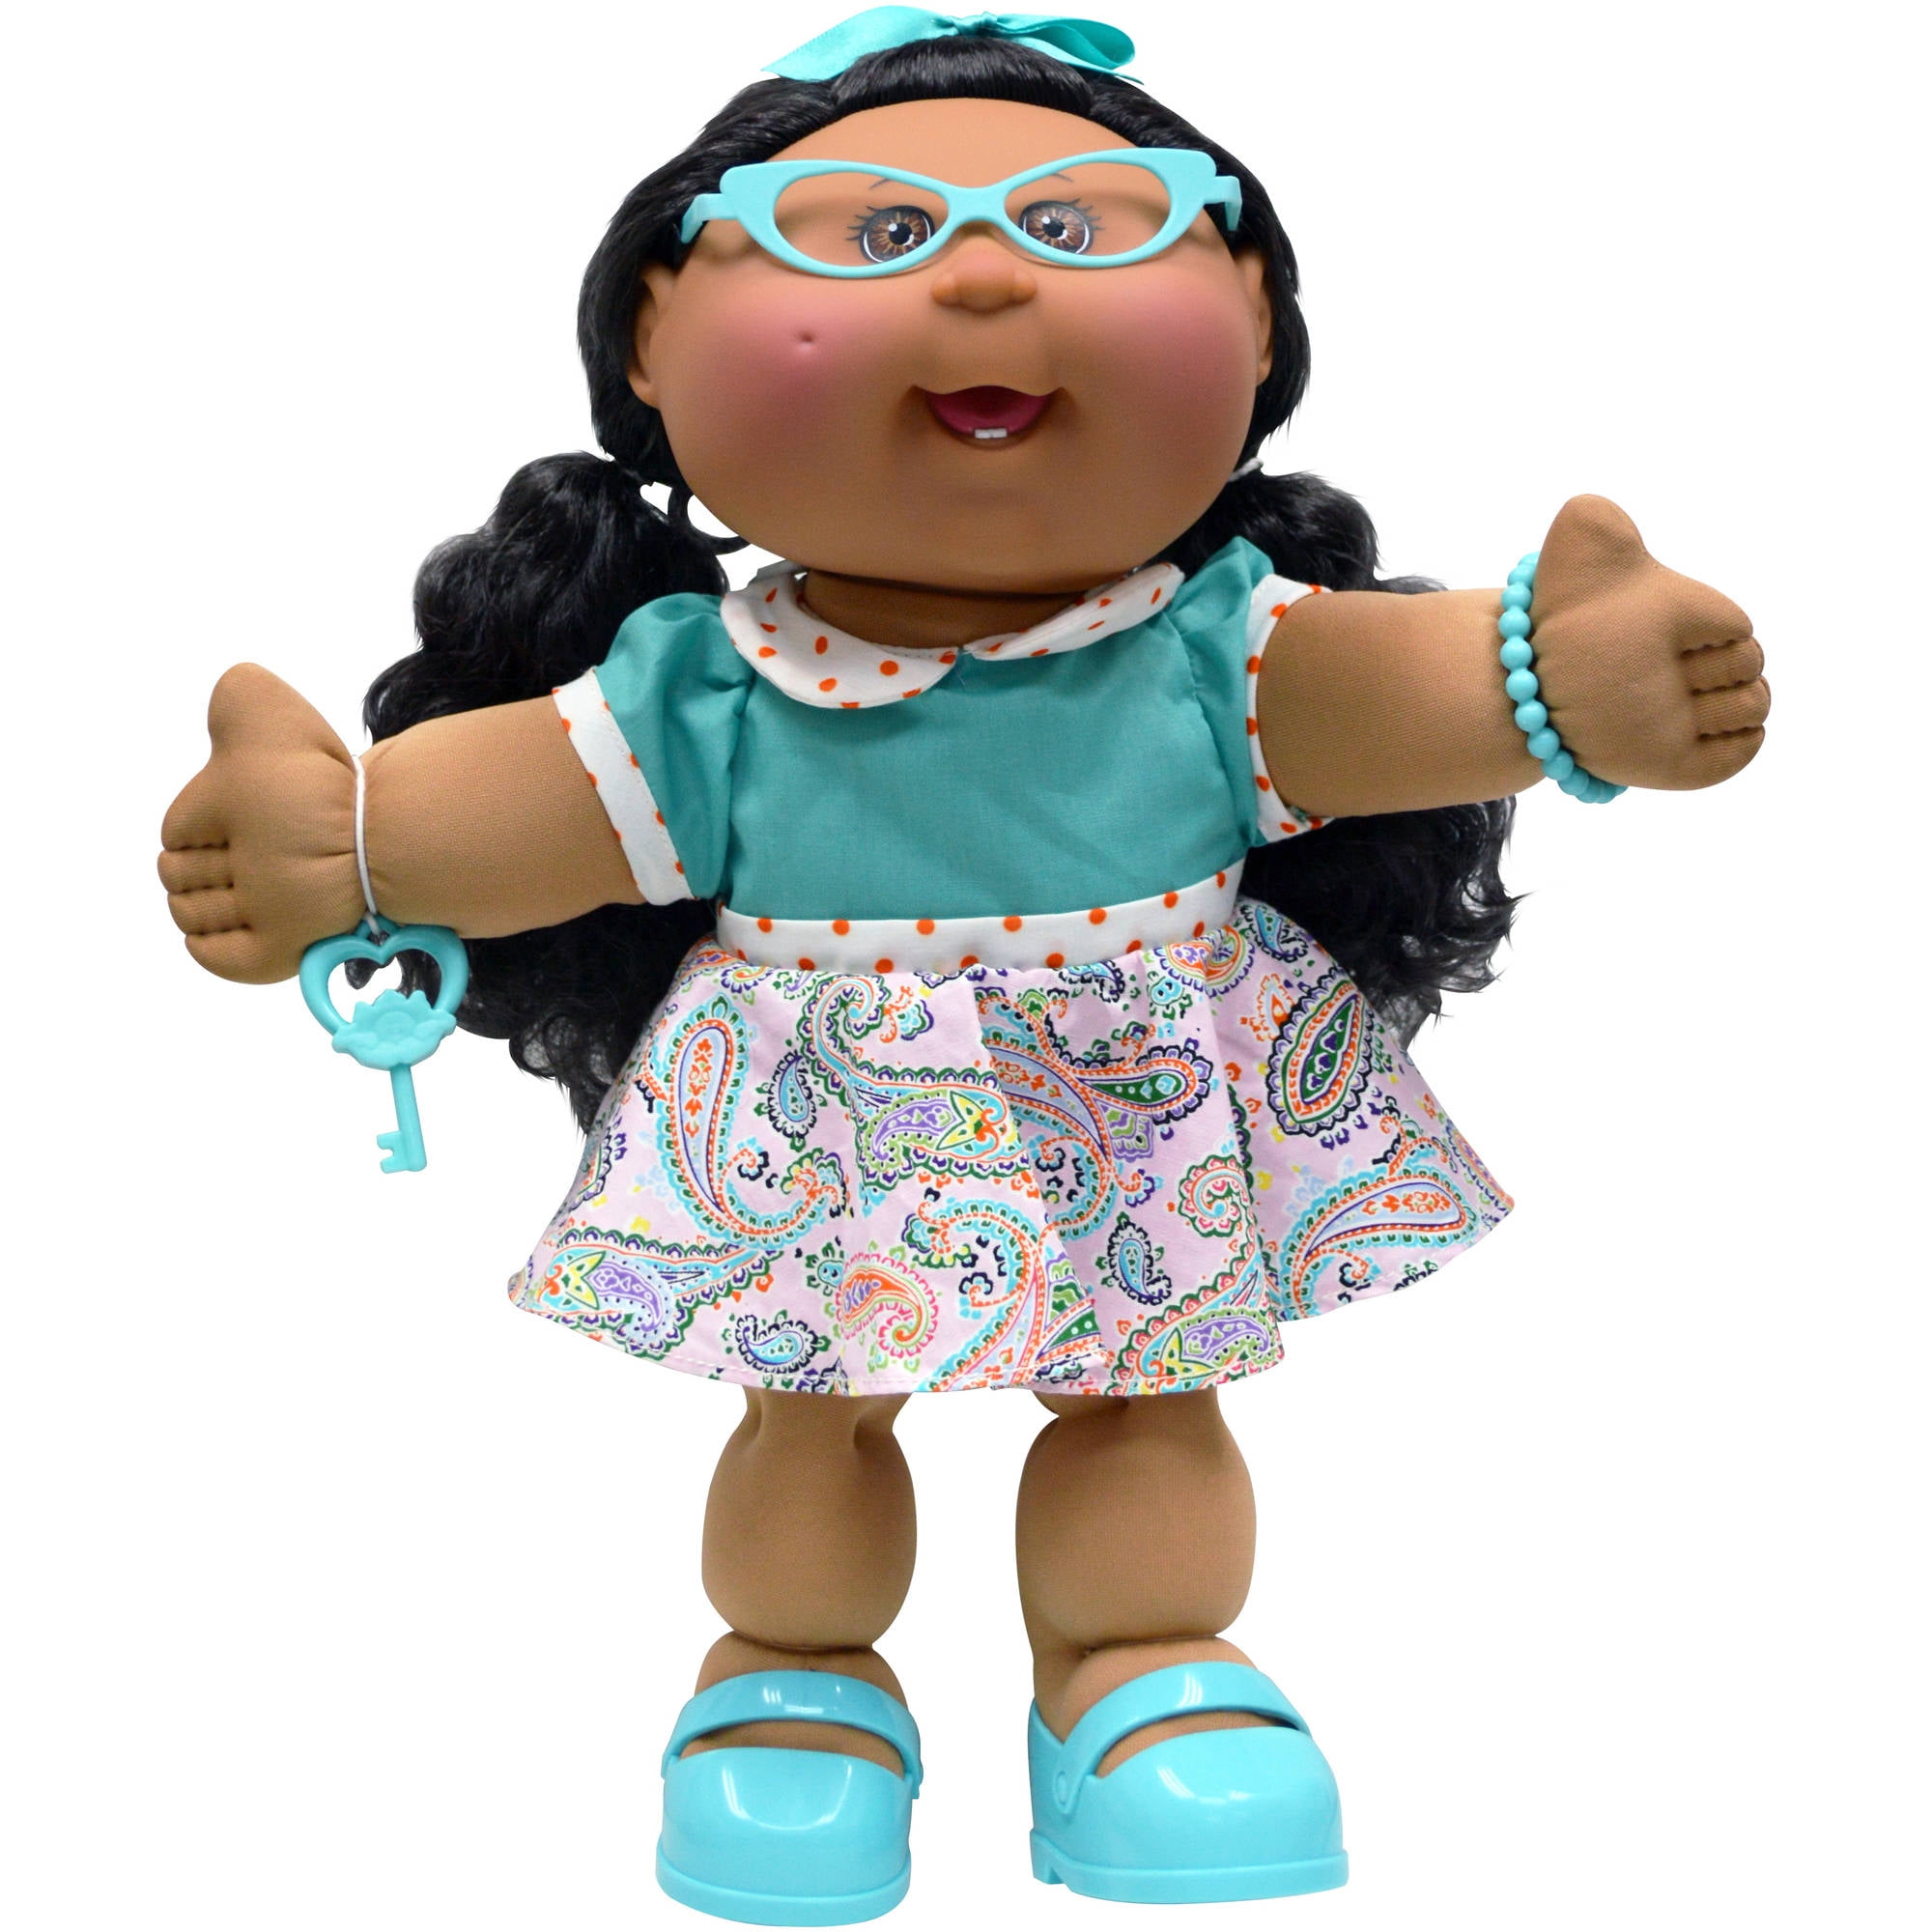 cabbage patch kid with black hair